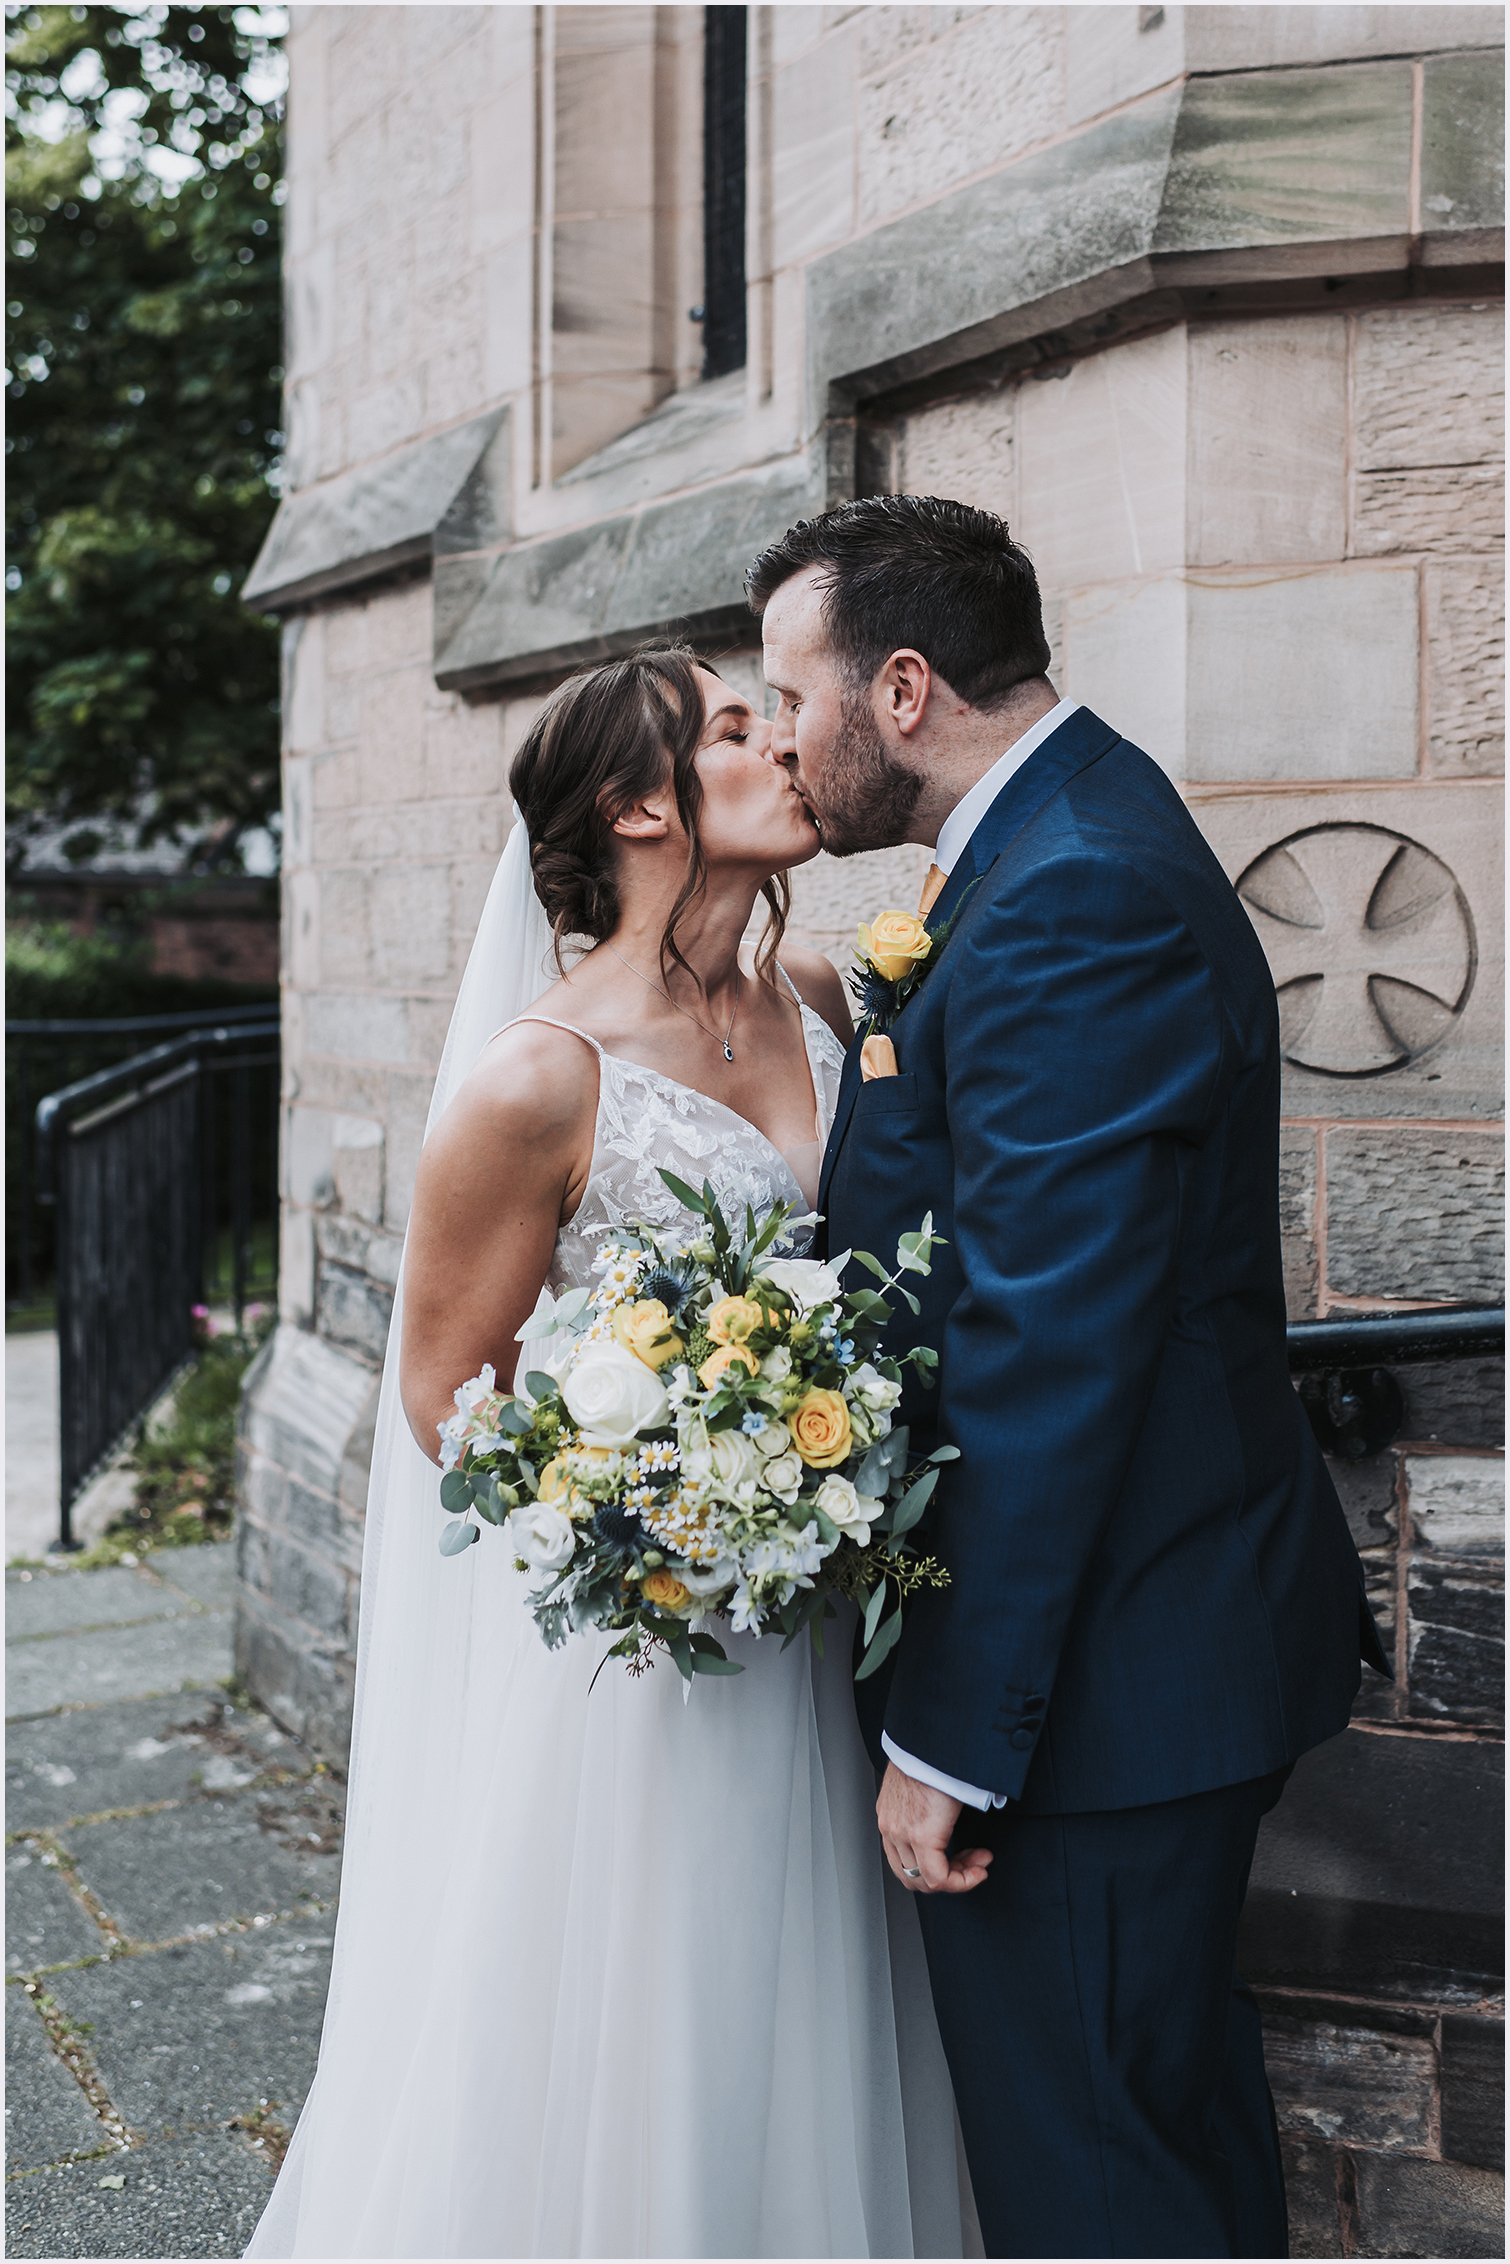 A bride and groom share a kiss  outside the church where they have just got married in Chester.  Image captured by north Wales wedding photographer Helena Jayne Photography